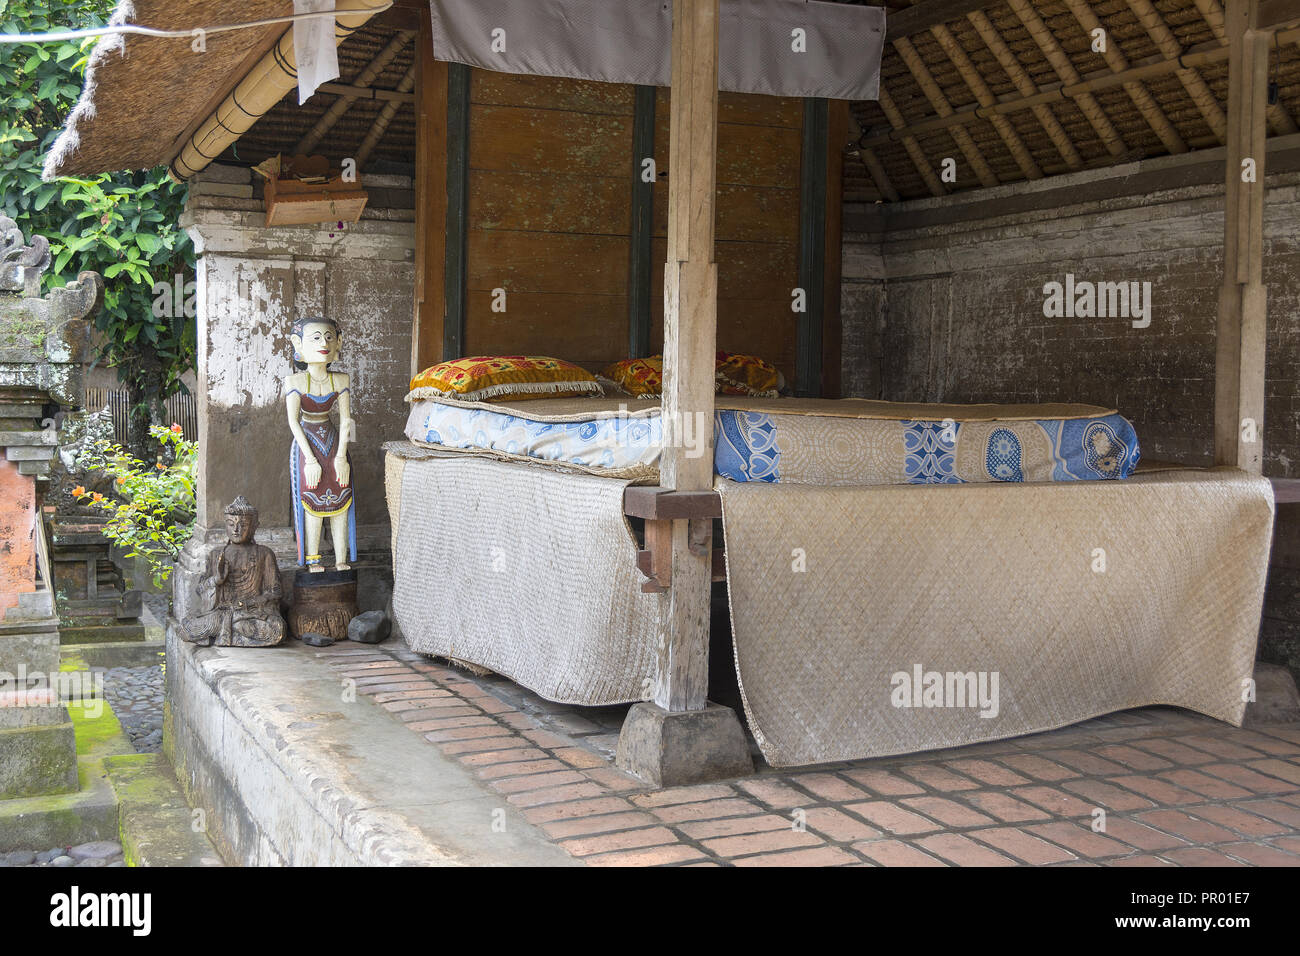 Traditional Balinese home showing large double bed for sleeping outdoors. Stock Photo